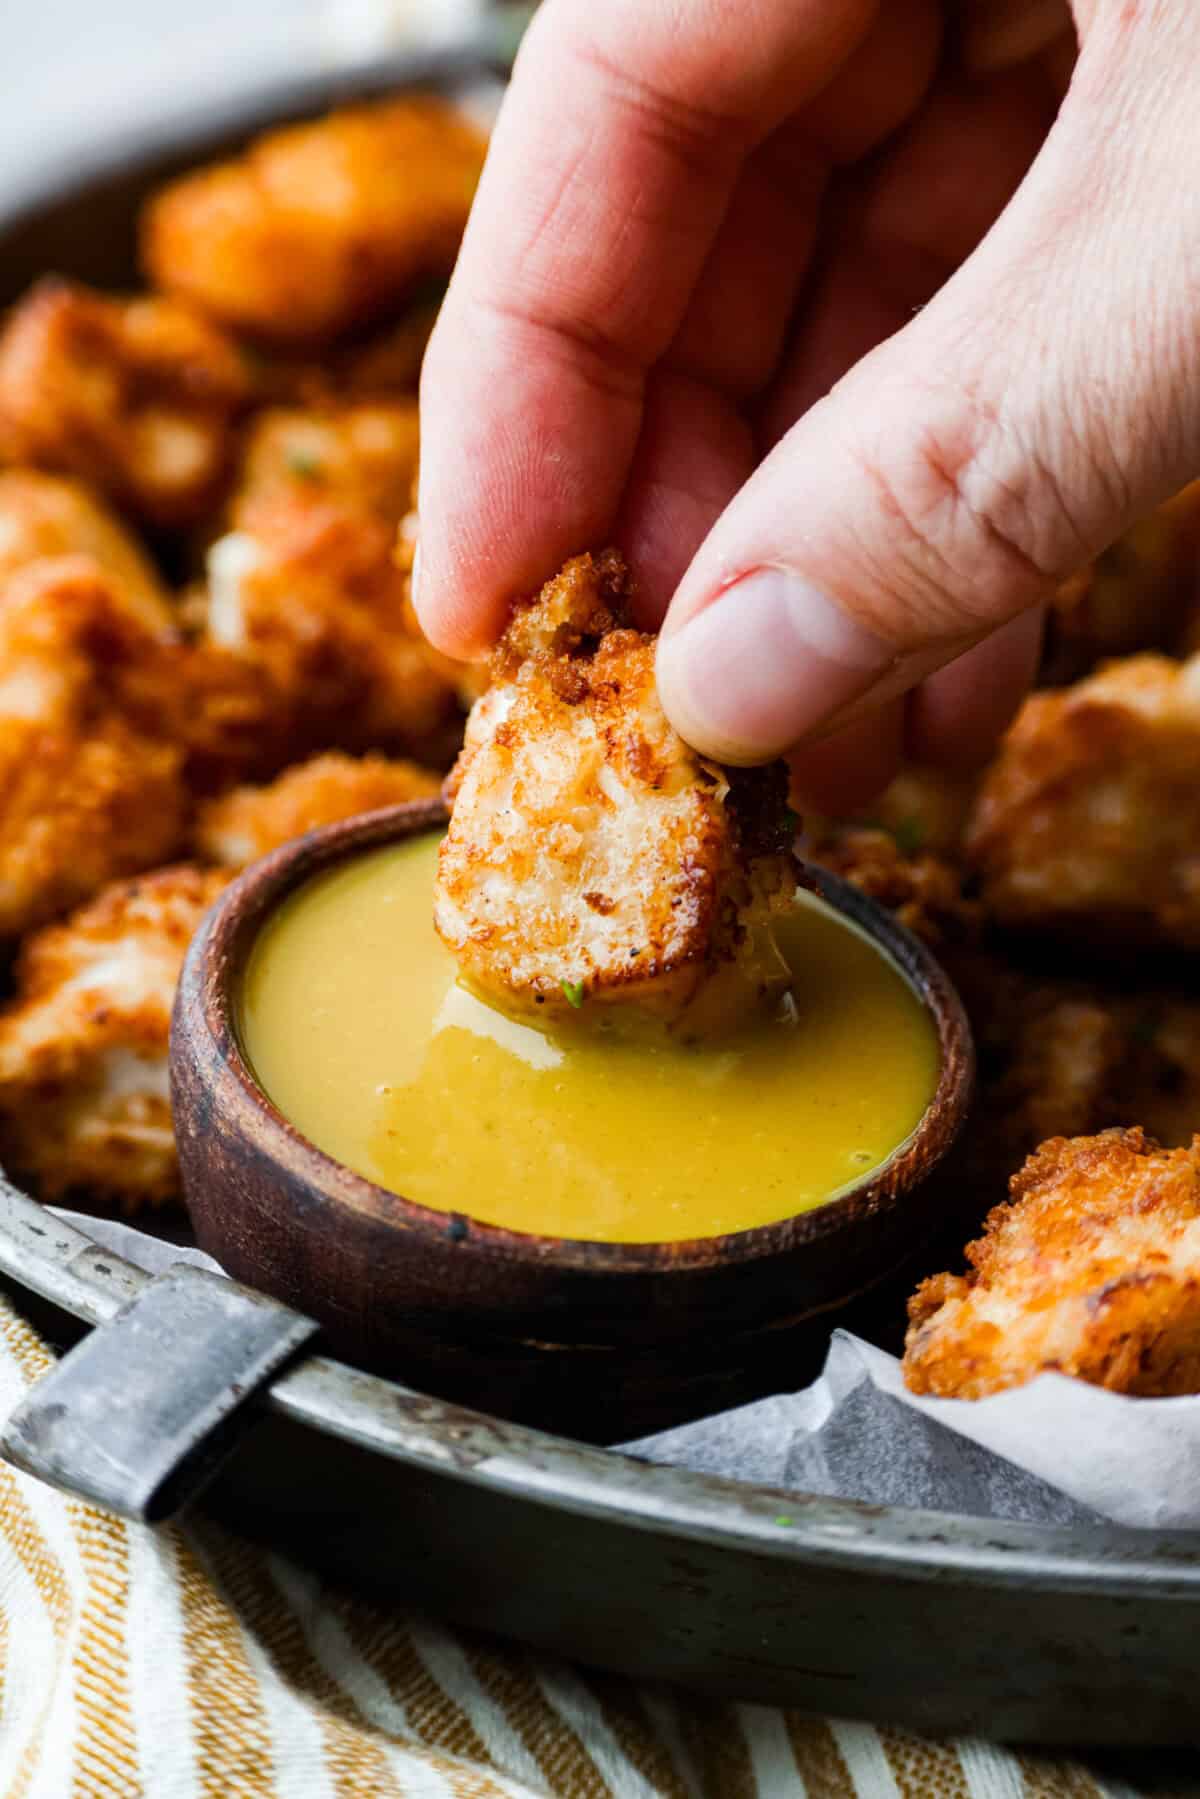 A copycat Chick-fil-A nugget being dipped in homemade chick-fil-a sauce. 